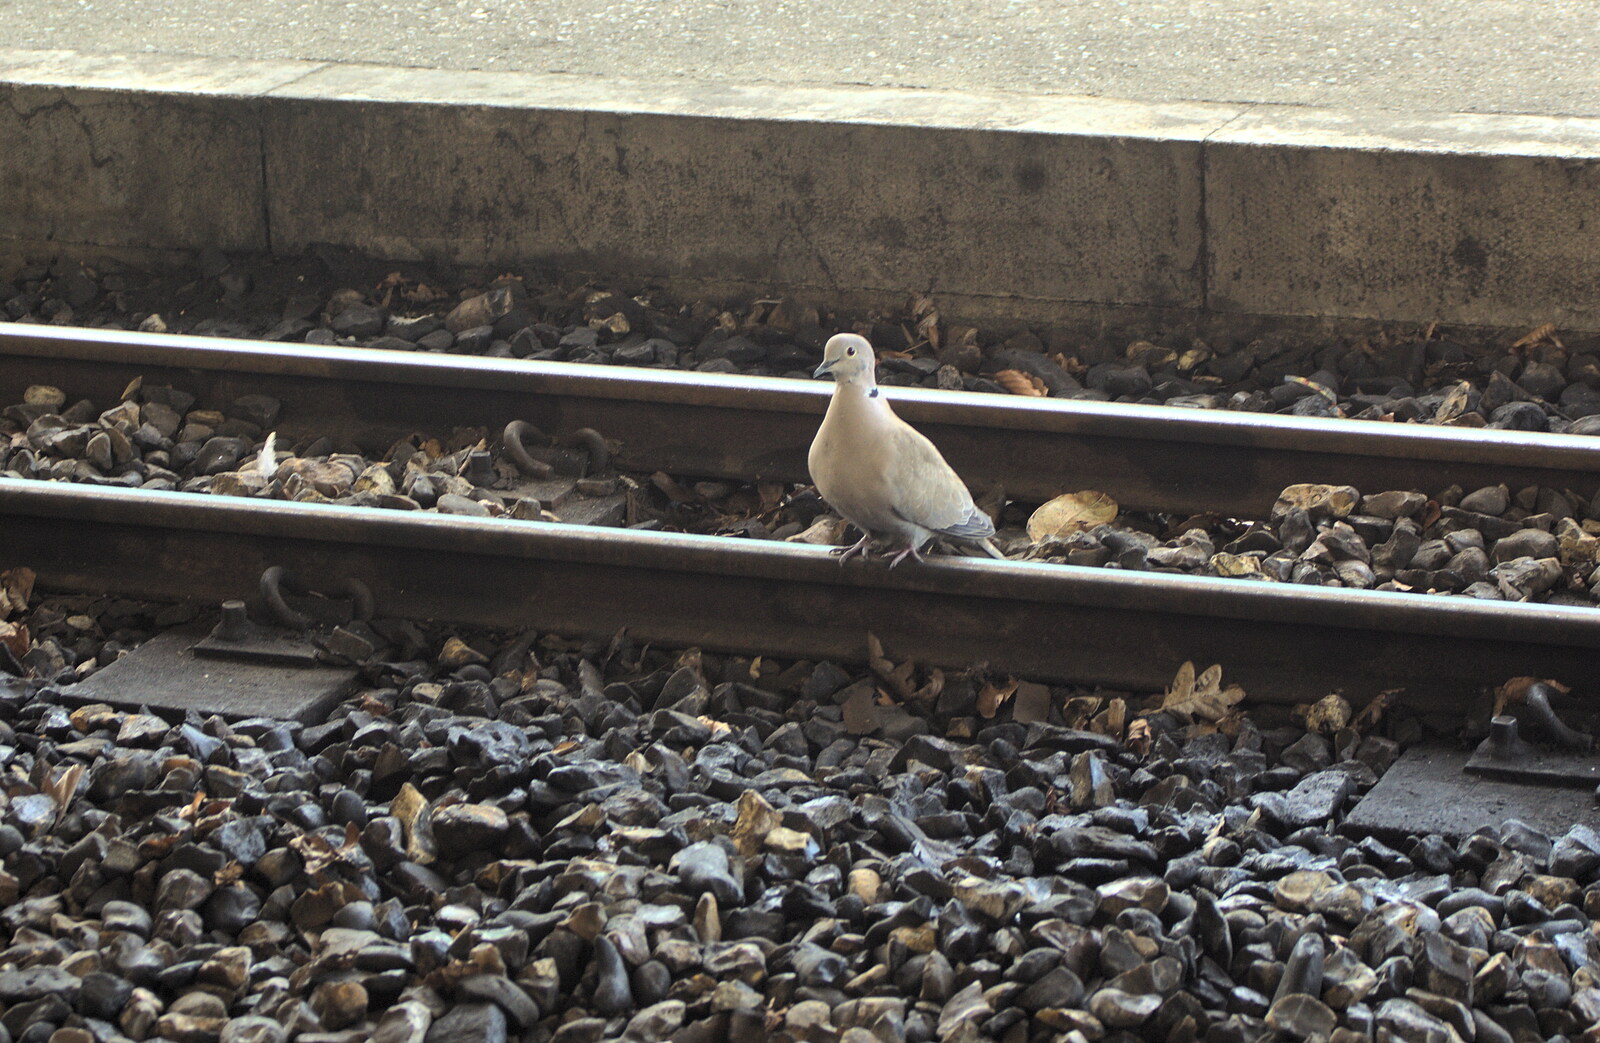 At Aylsham, there's a dove on the tracks from The Bure Valley Railway, Aylsham, Norfolk - 26th May 2013